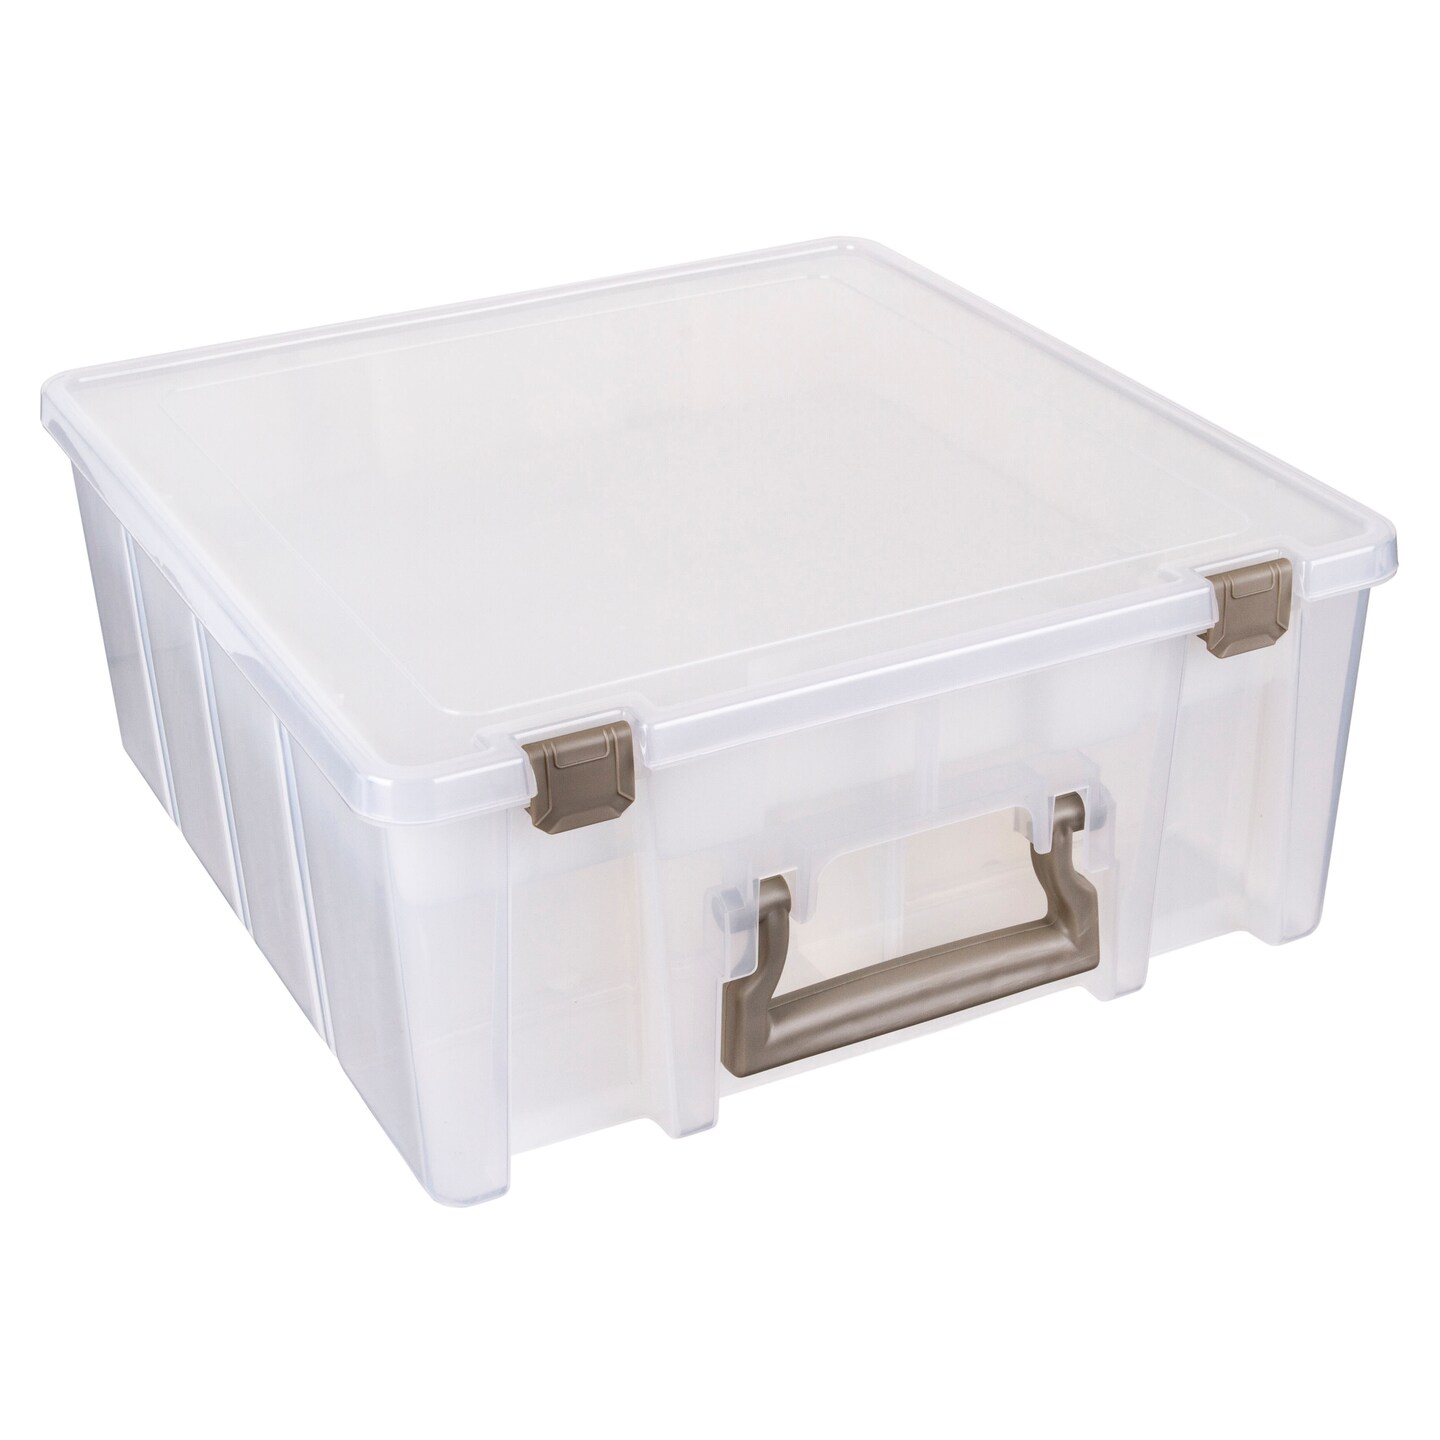 Super Satchel™ Double Deep with Lift Out Tray, 6899AZ